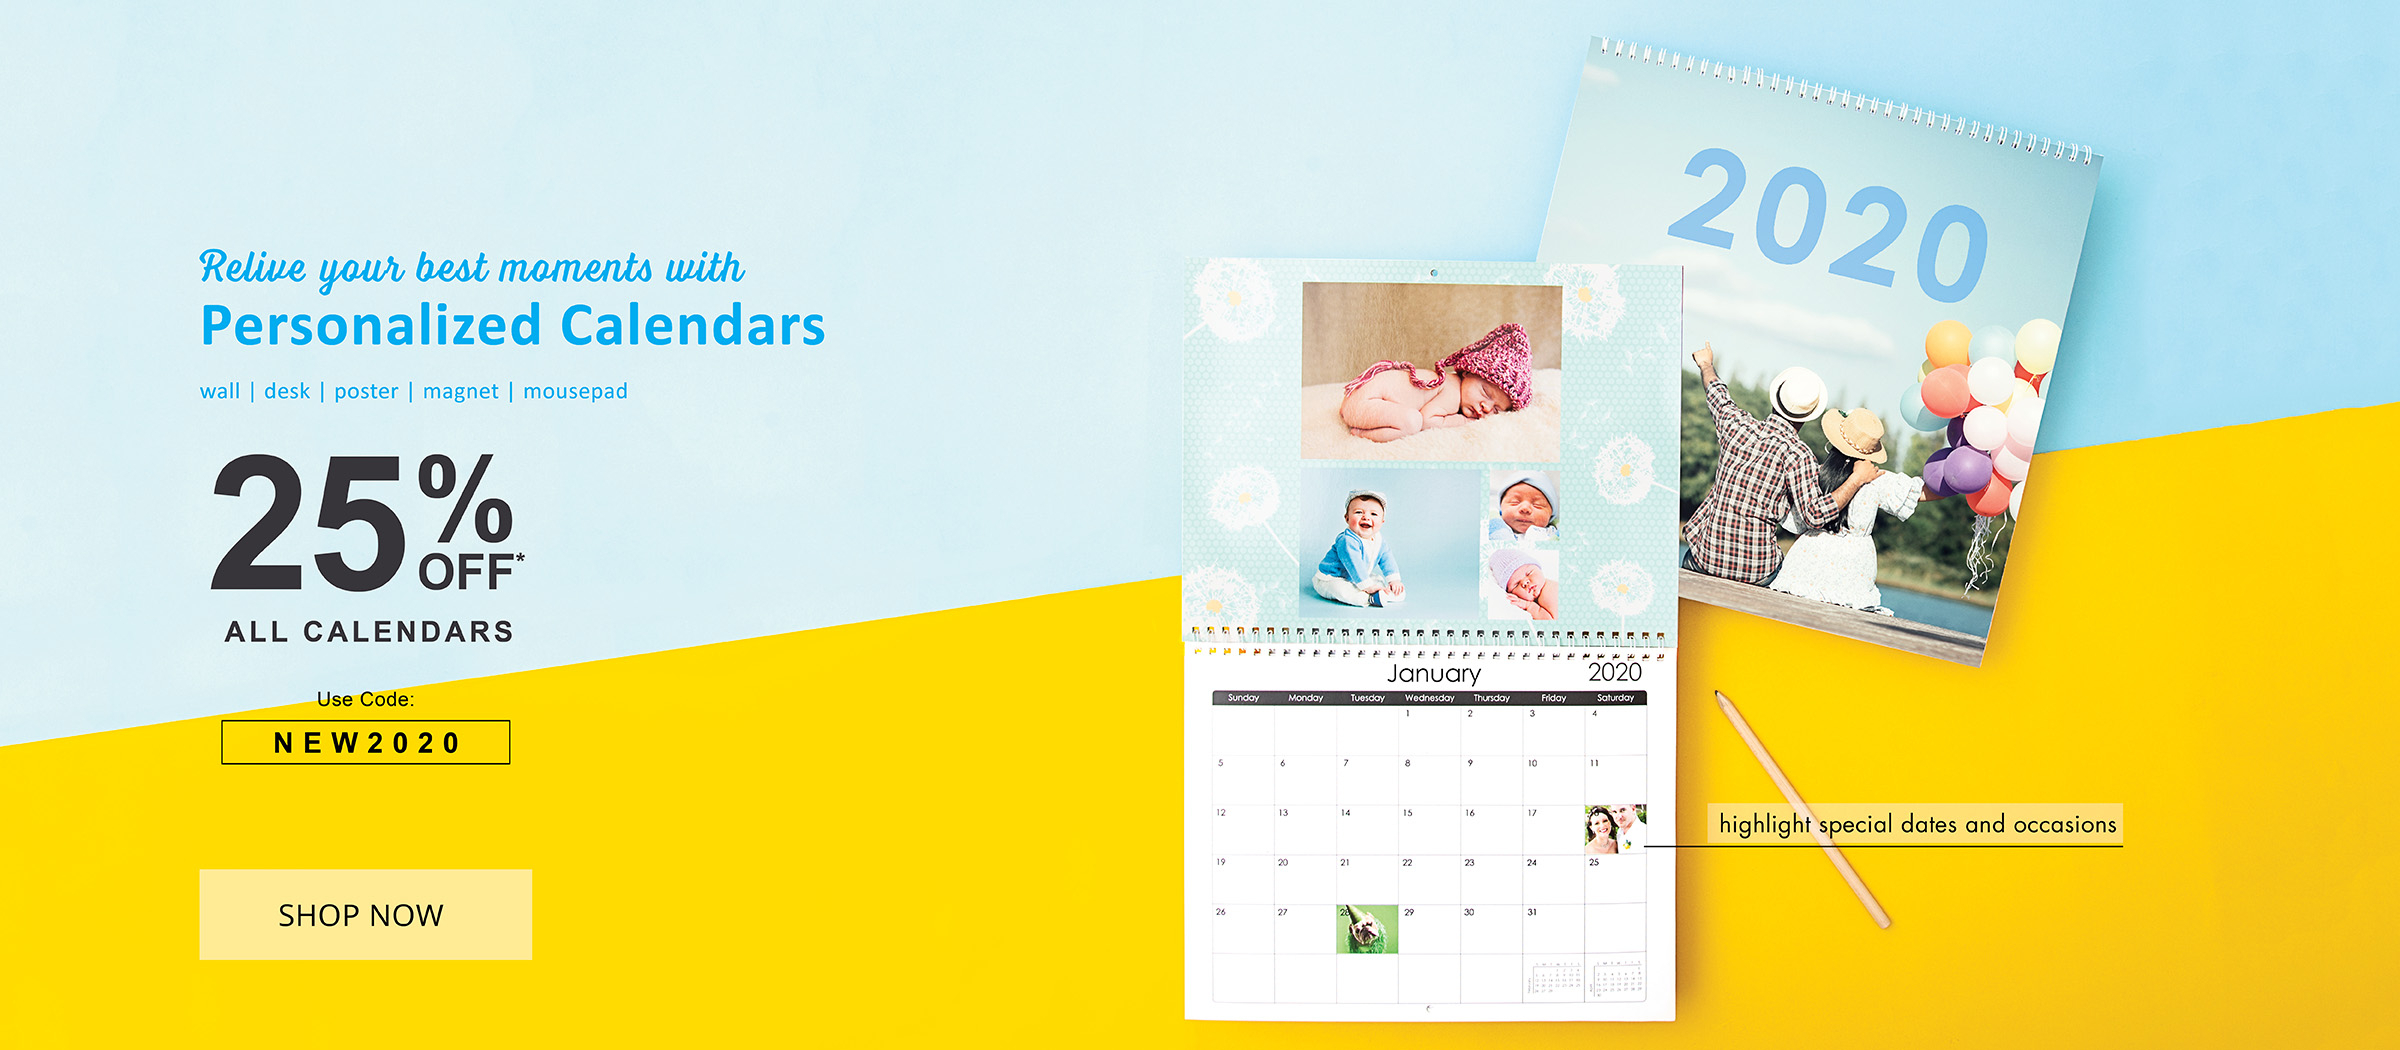 Make Personalized Photo Gifts Online | Printed Cards &amp; Gift intended for Personalized Calendar Maker Philippines